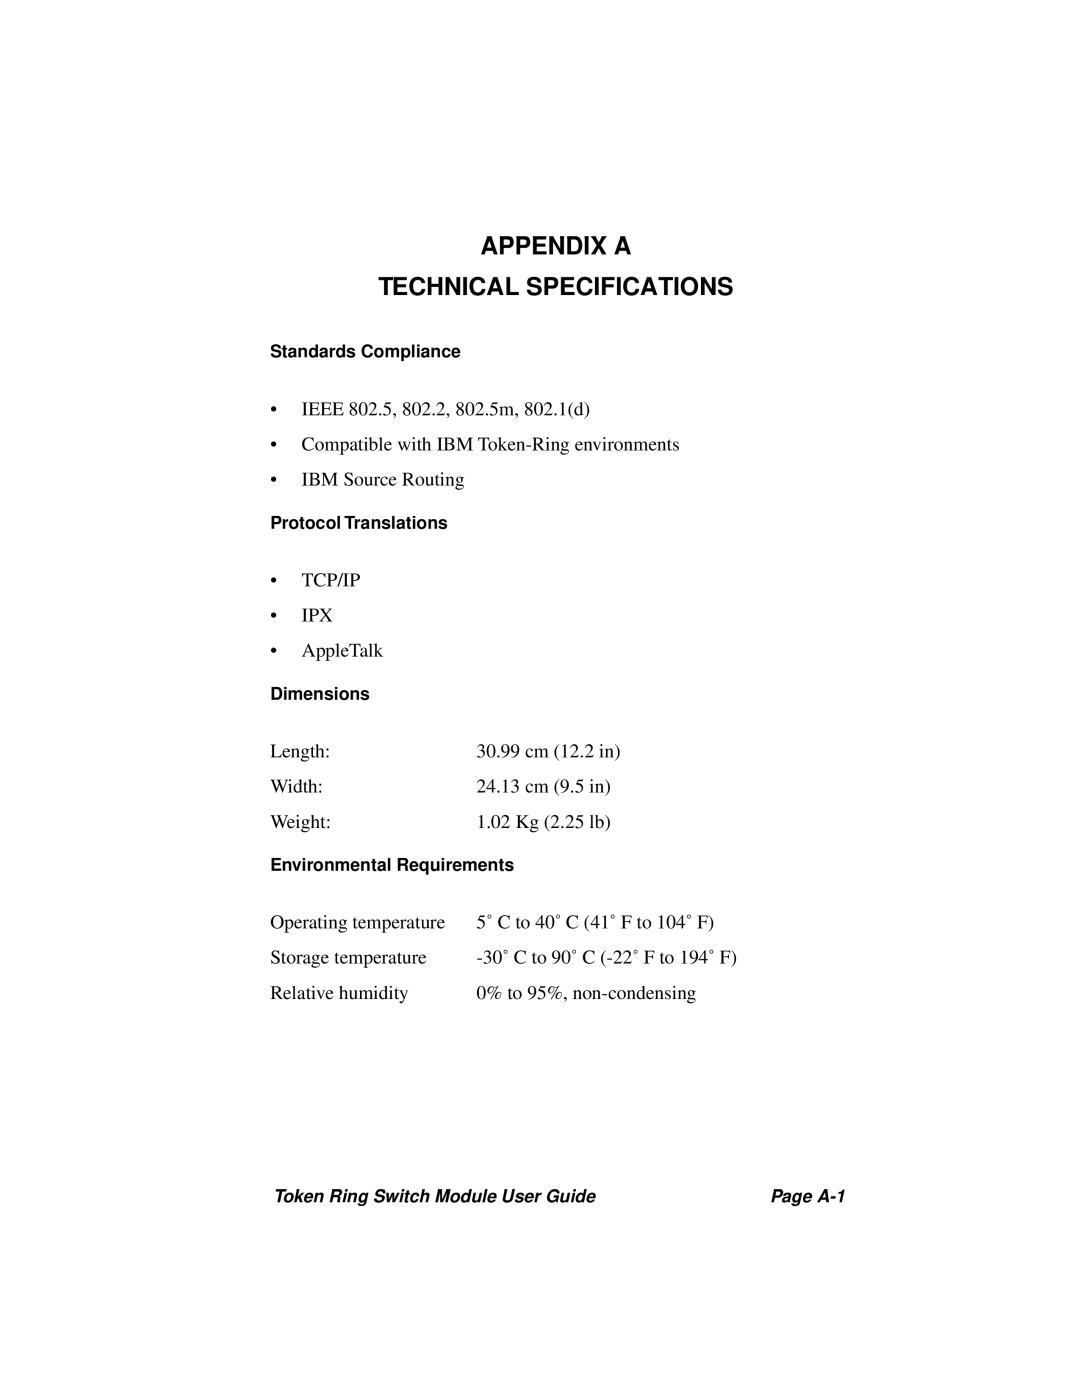 Cabletron Systems 3T02-04 manual Appendix A Technical Specifications 